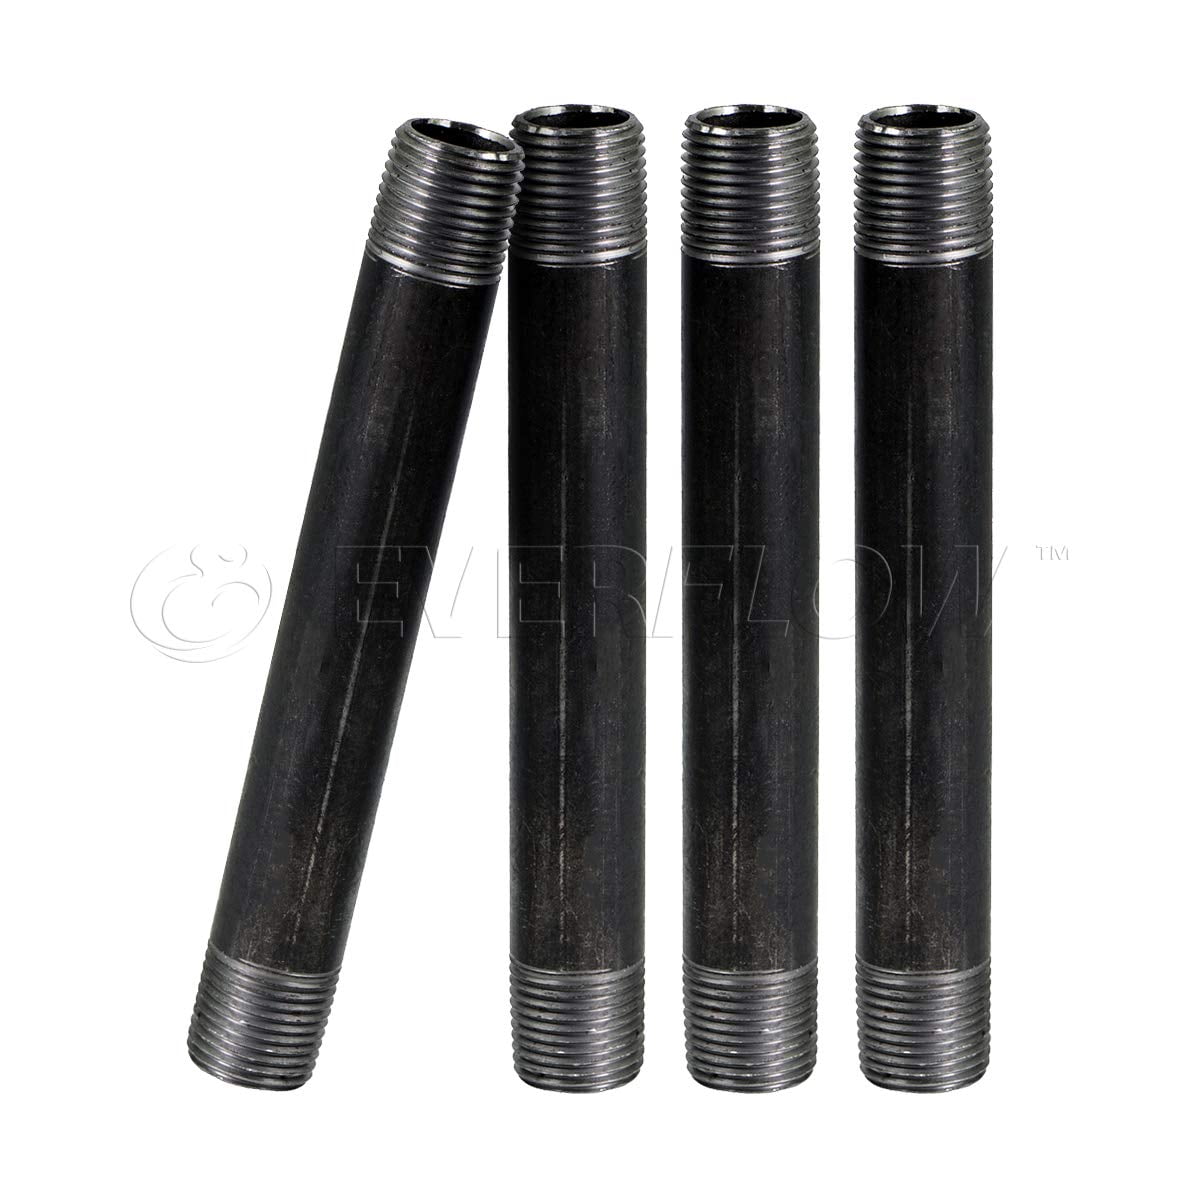 Details about   Black Steel Nipple Threaded Pre Cut Pipe Connectors 1-1/4'' D. 4 Pack/Long 